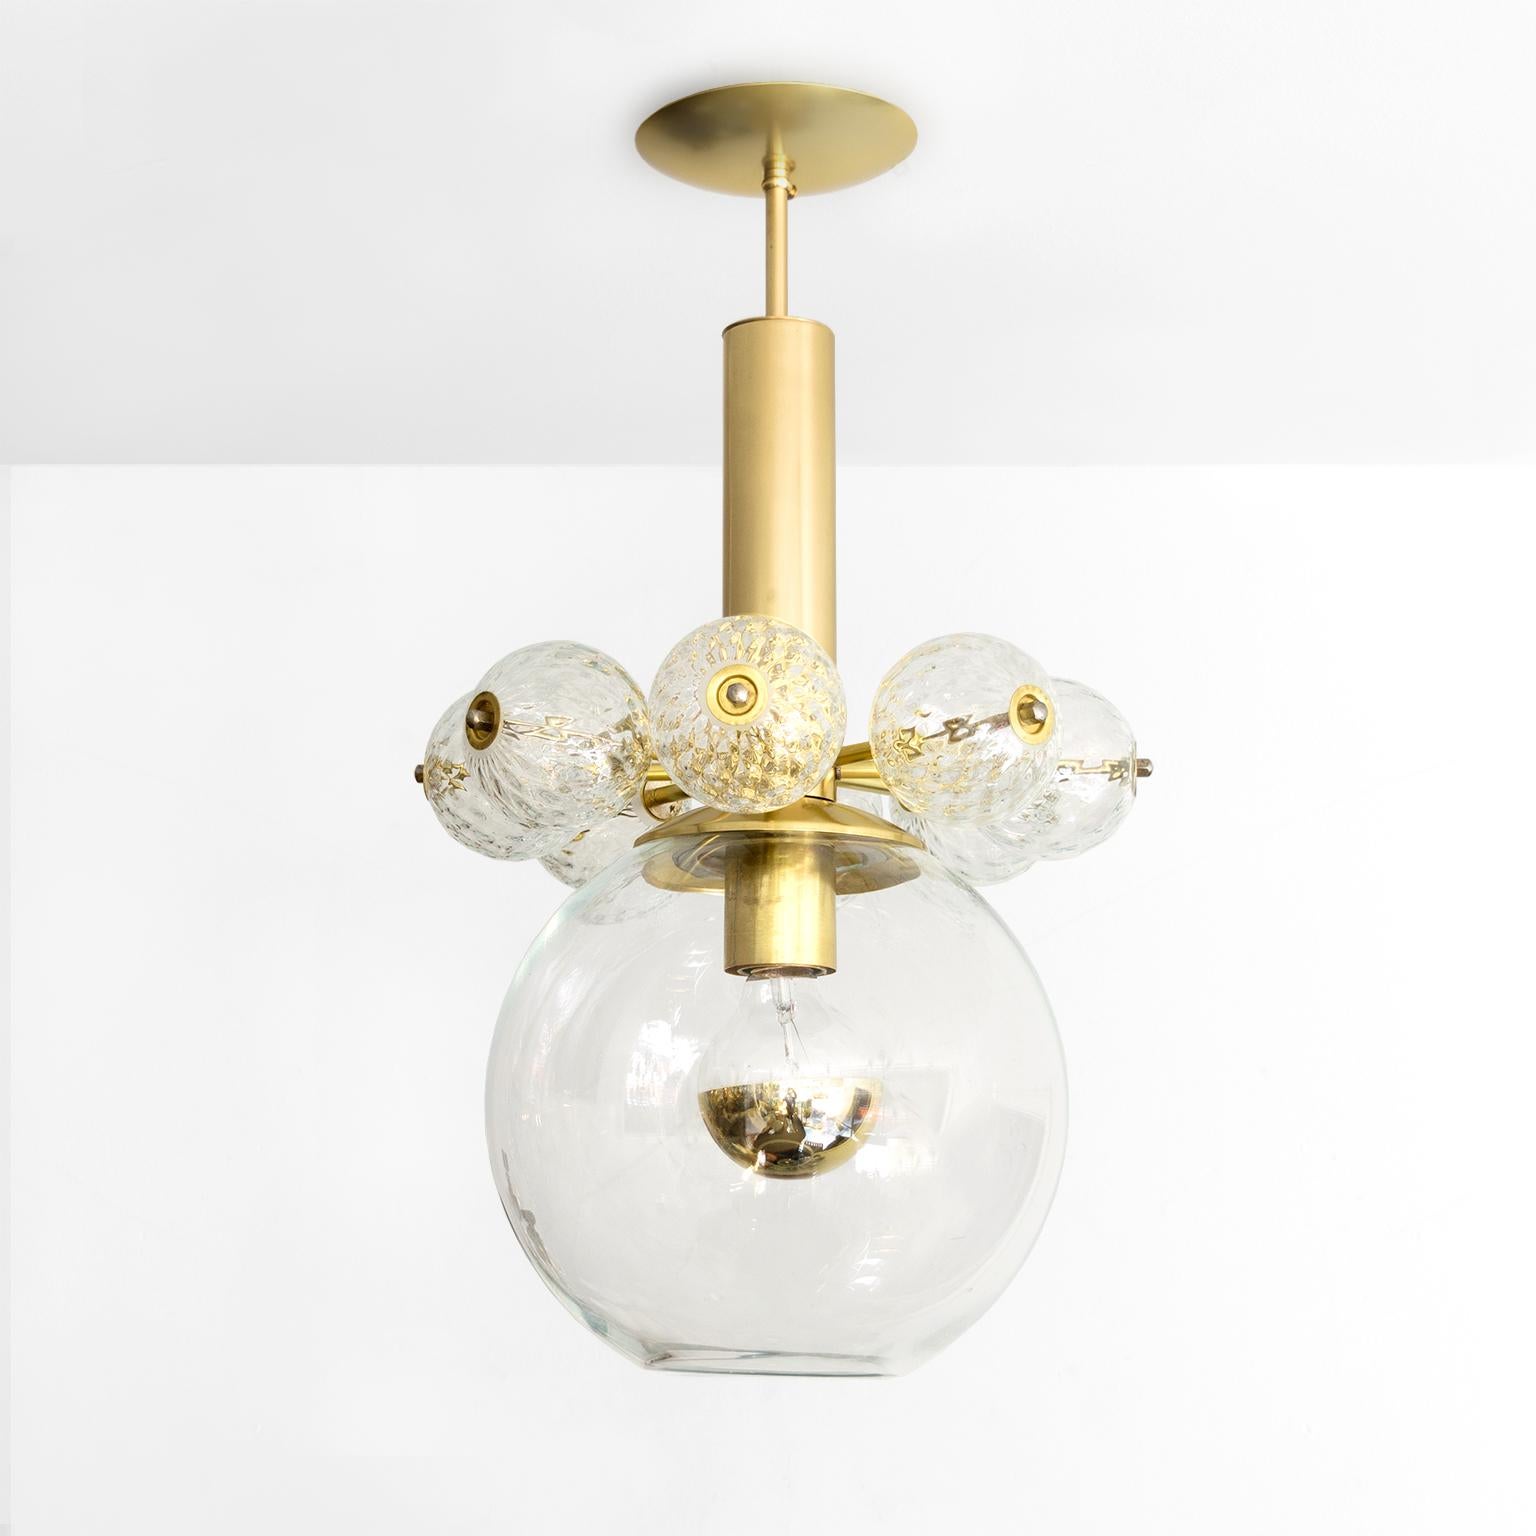 Kamenicky Senov, Czech pendant with hand blown glass on a polished brass frame. The fixture has a collar of clear glass crystal globes which rests atop a larger glass shade. Newly restored, polished and lacquered brass, newly rewired for use in the